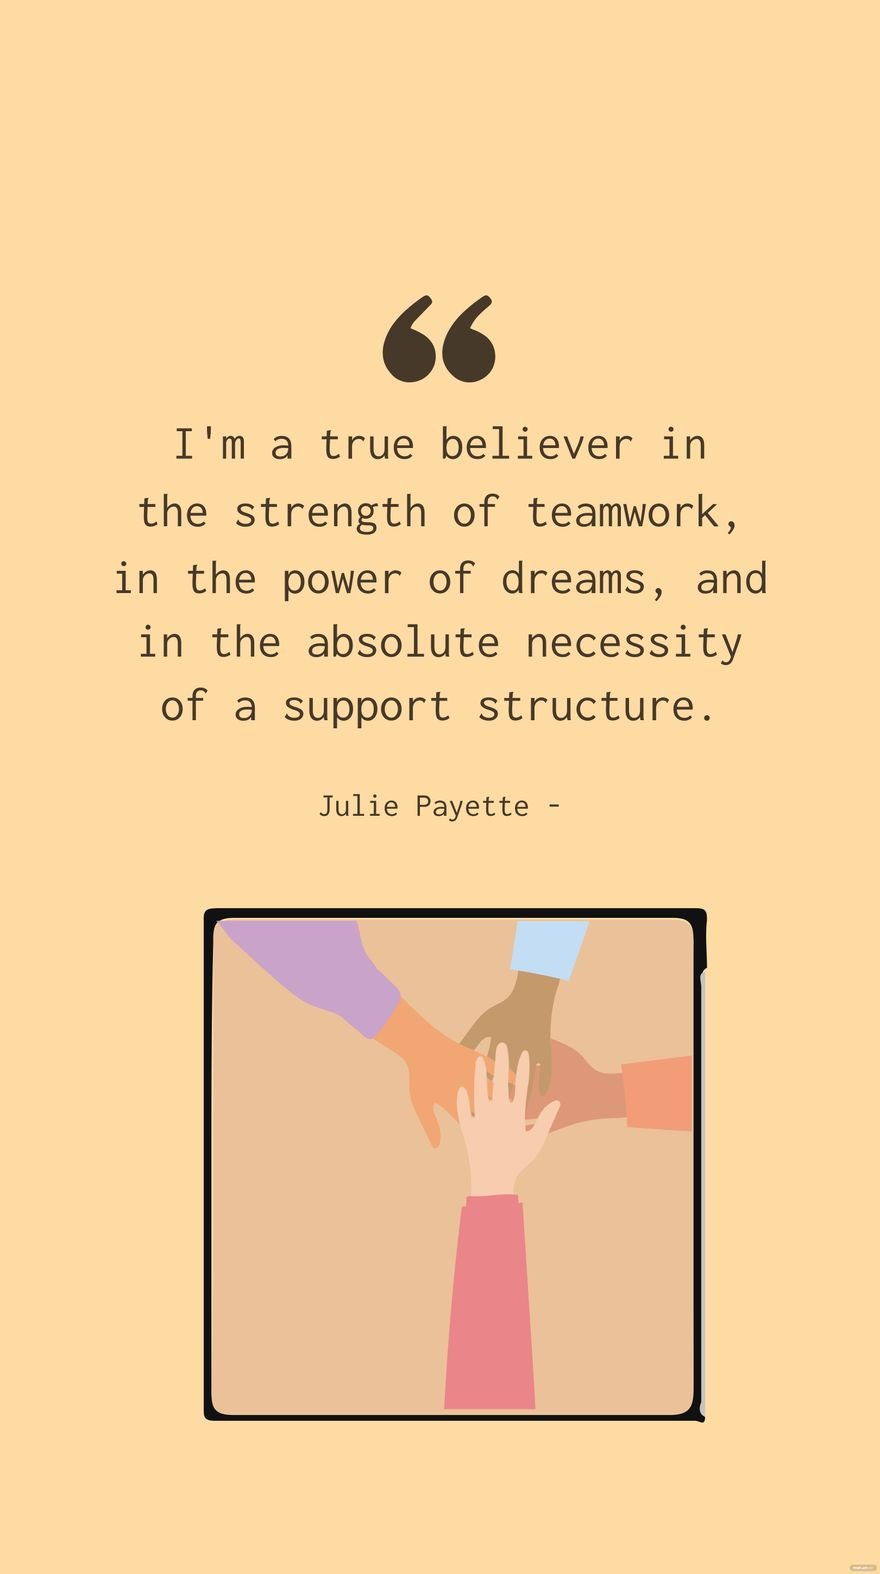 Free Julie Payette - I'm a true believer in the strength of teamwork, in the power of dreams, and in the absolute necessity of a support structure. in JPG